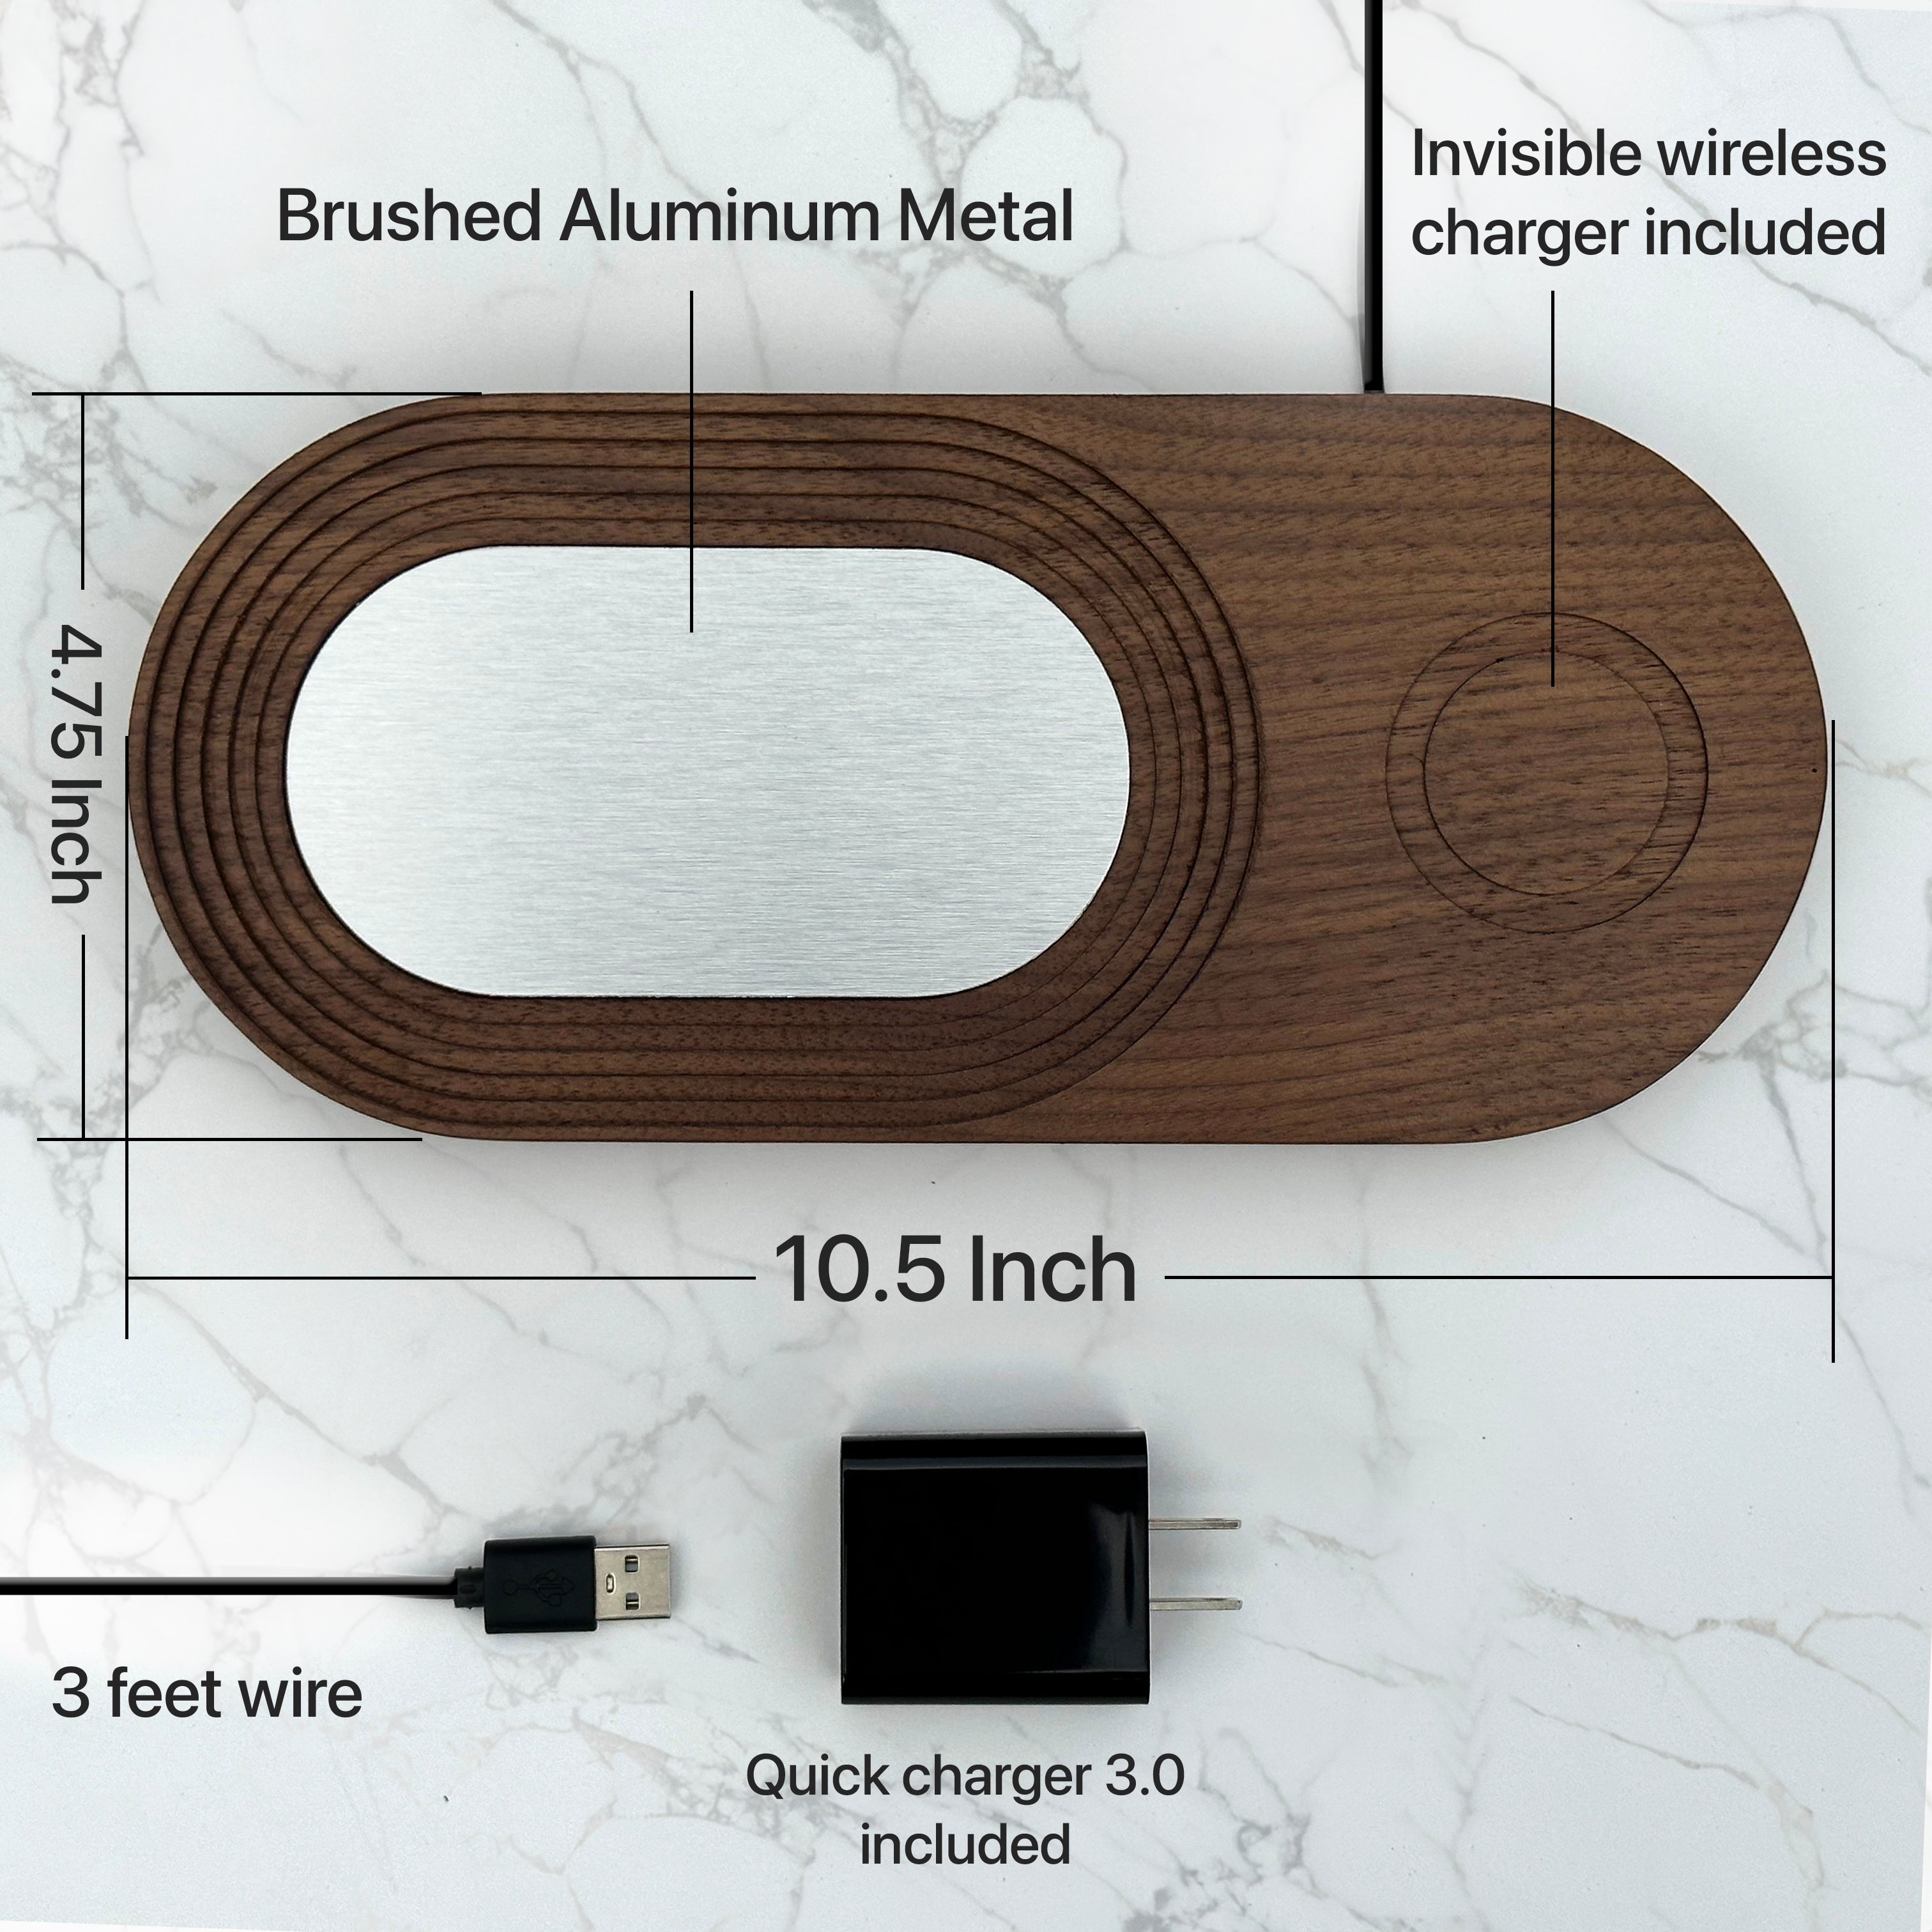 Charging tray specifications - 4.75x10.5 with 3 feet wire and quick charger adaptor